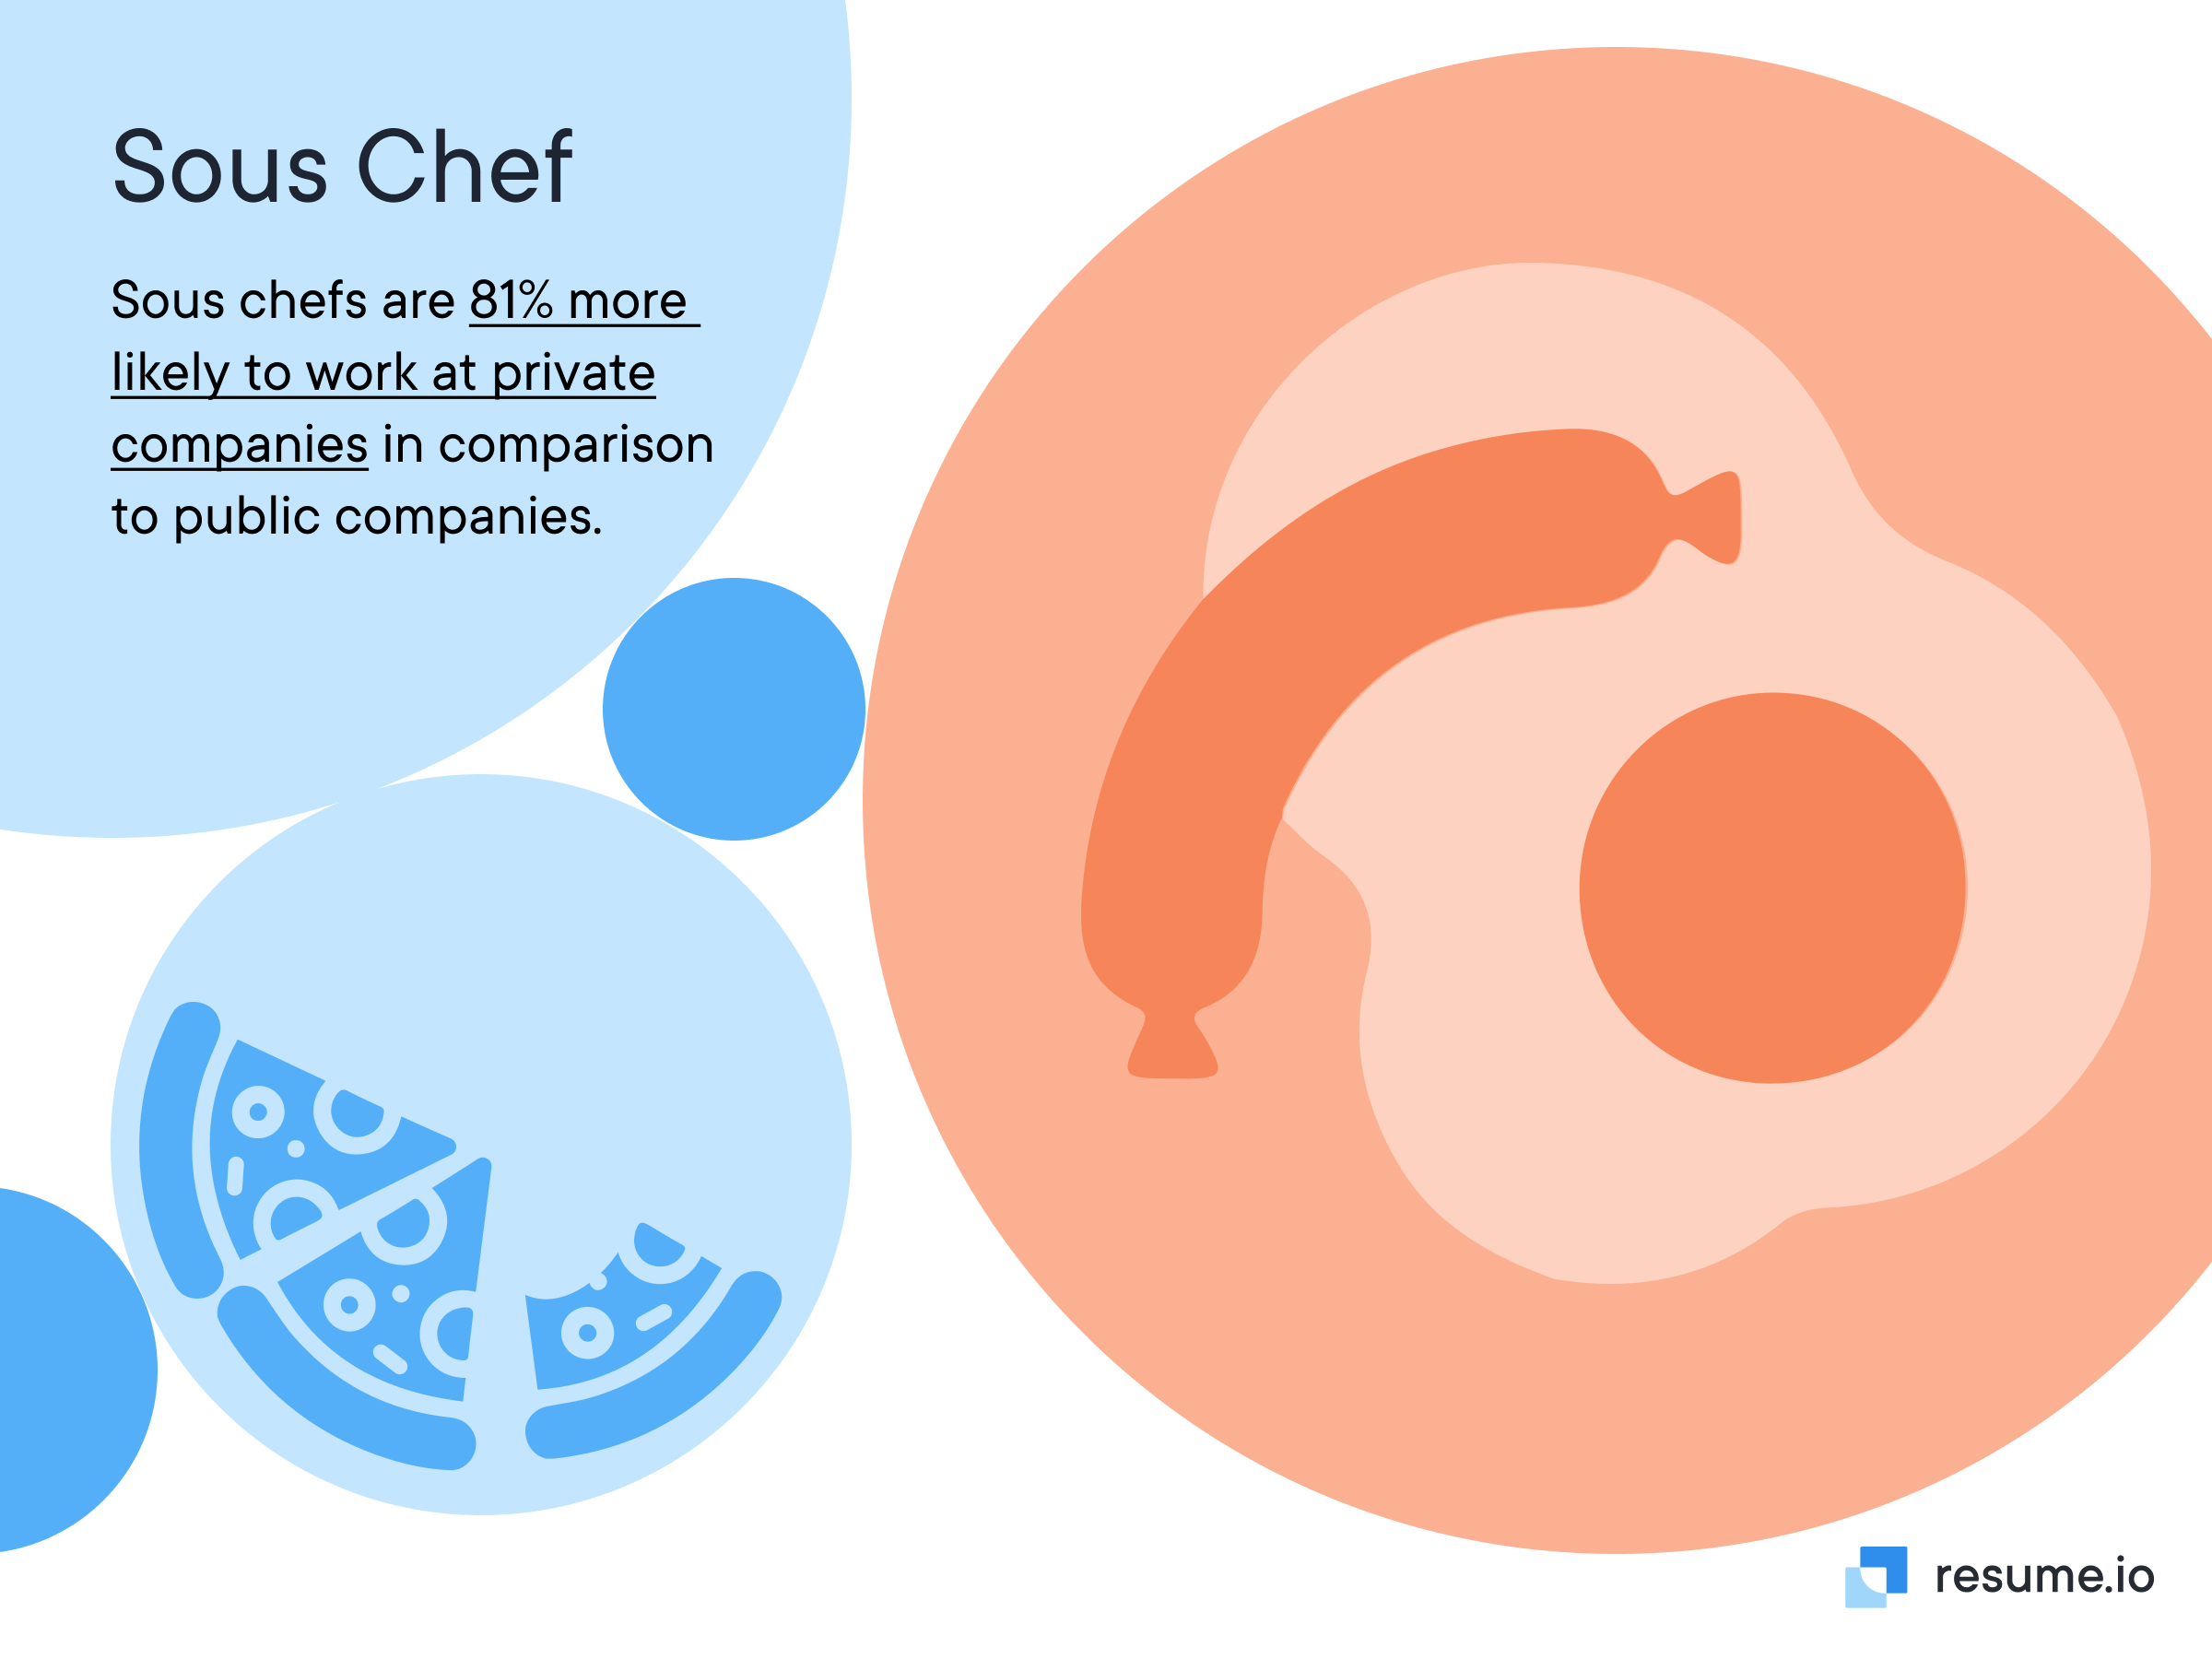 Sous chefs are more likely to work at private companies